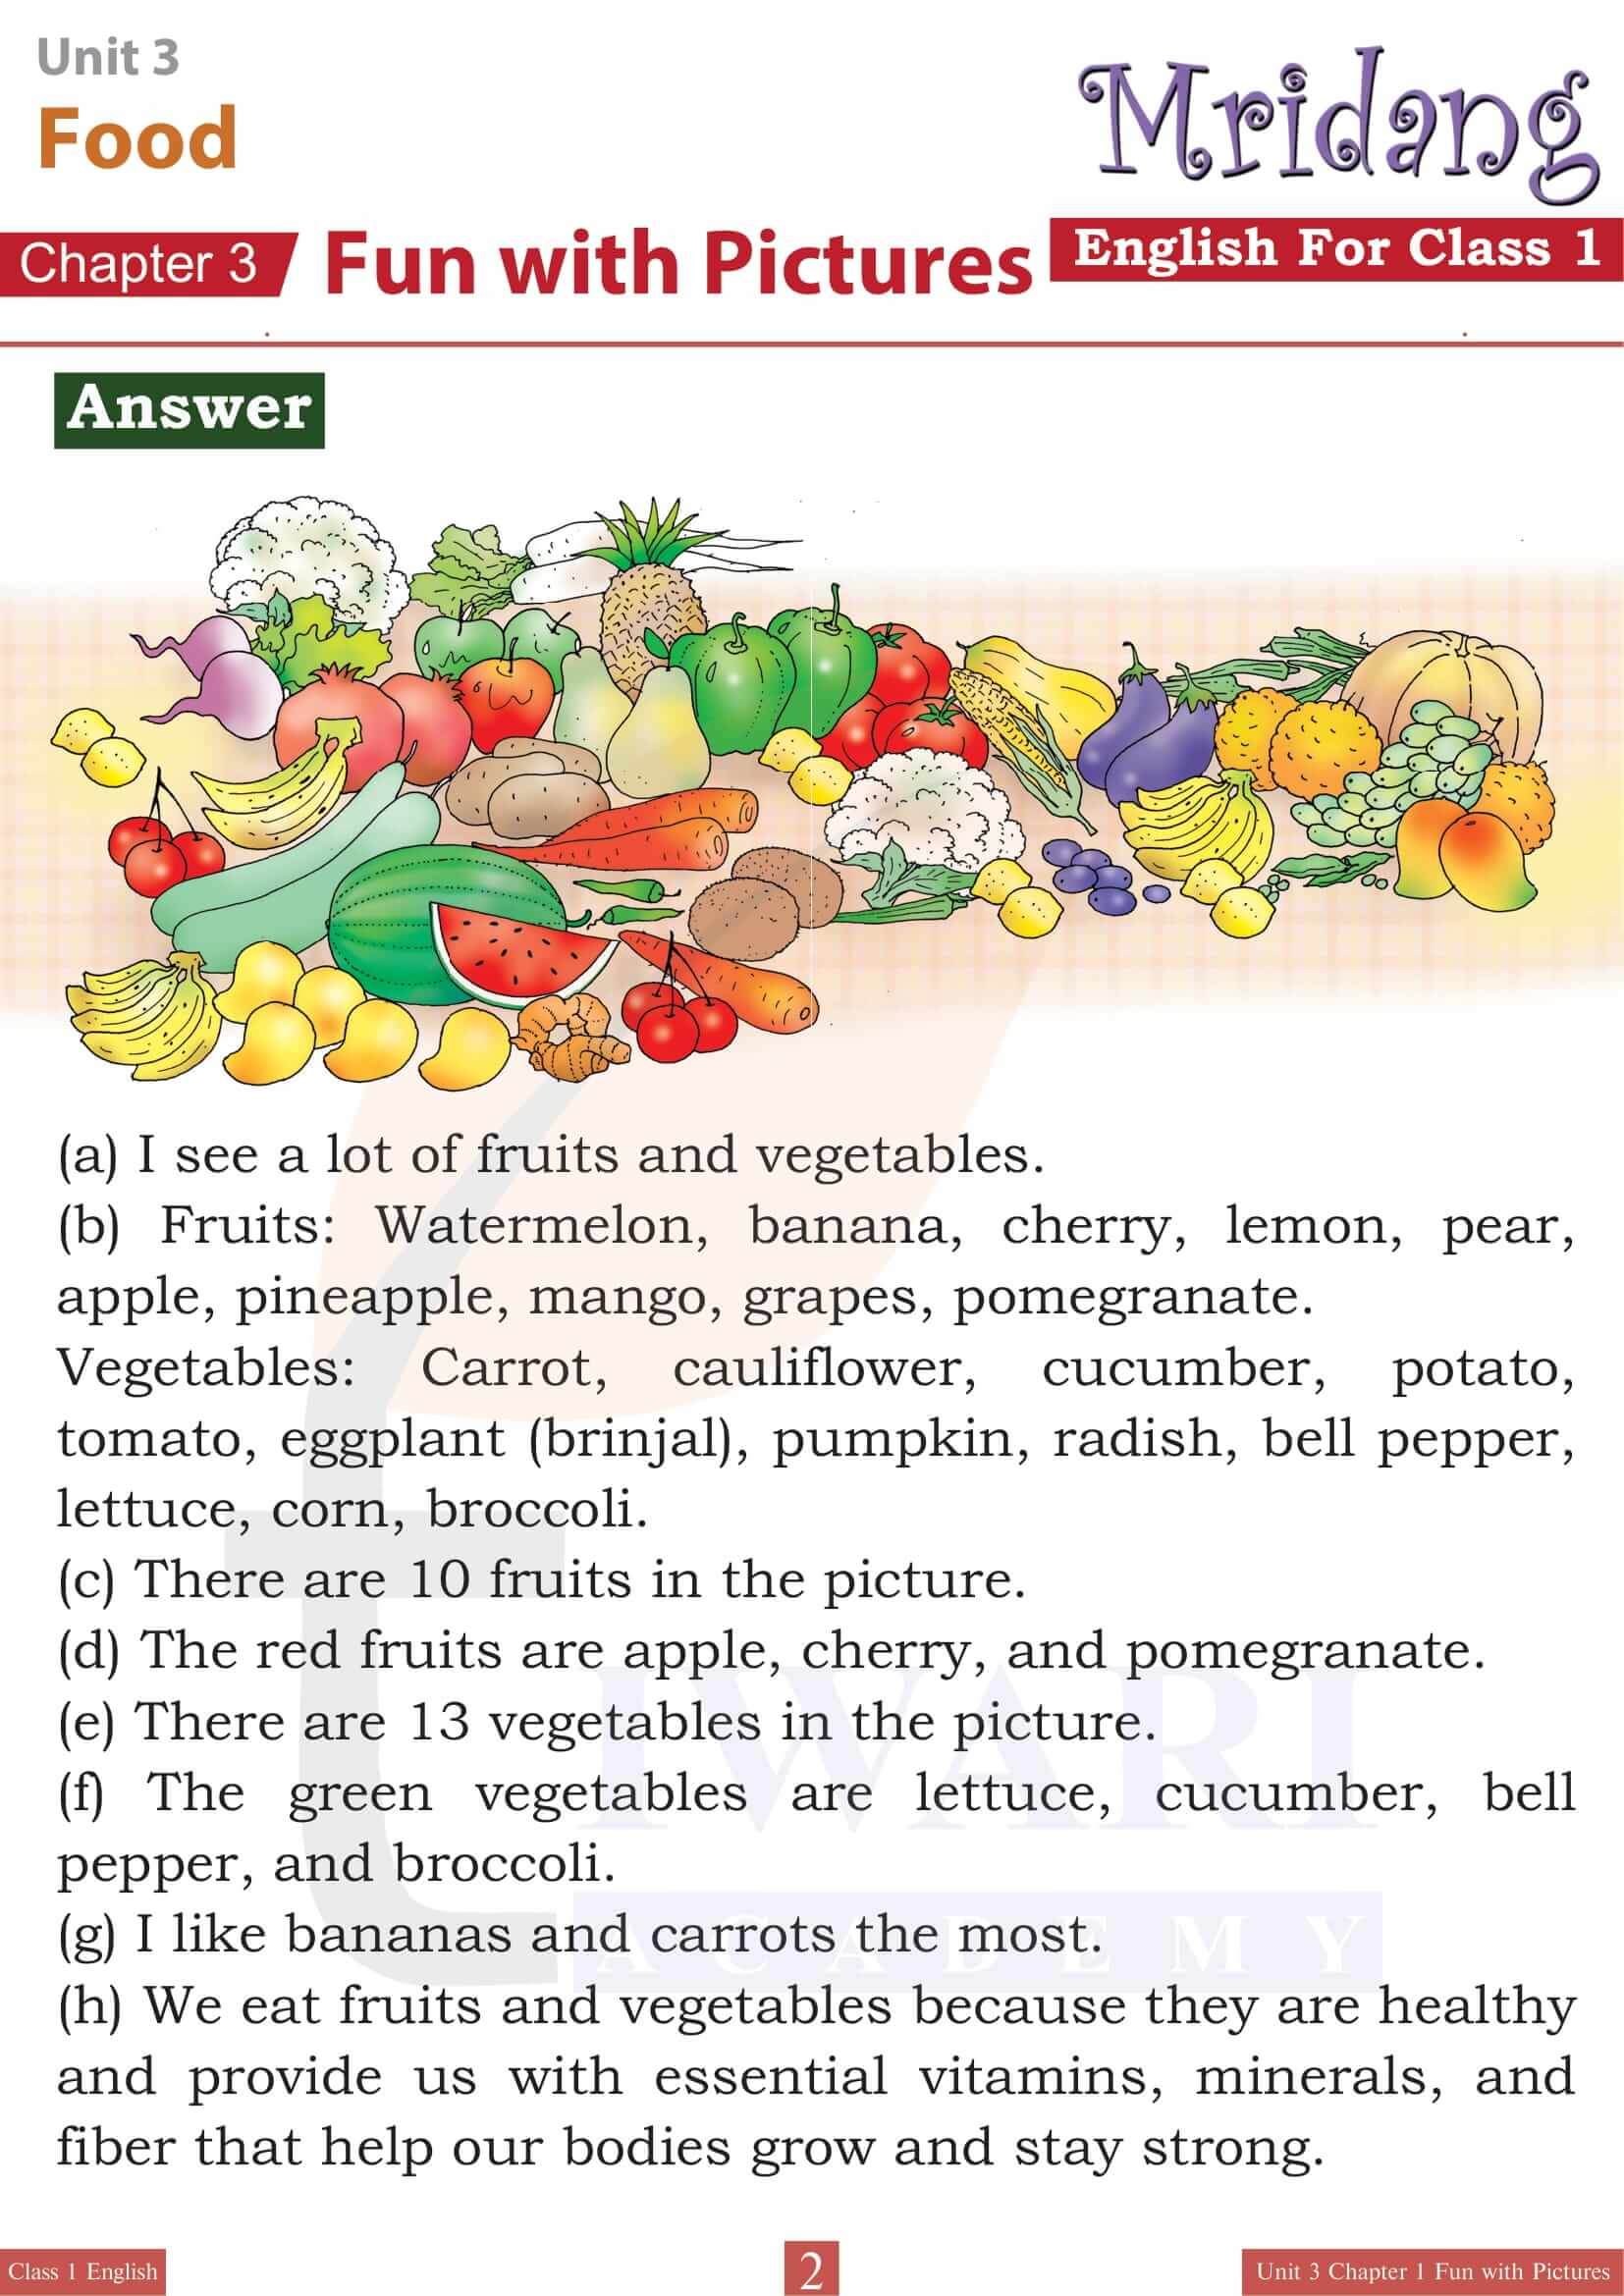 NCERT Solutions for Class 1 English Mridang Unit 3 Food Chapter 1 Fun with Pictures Exercises